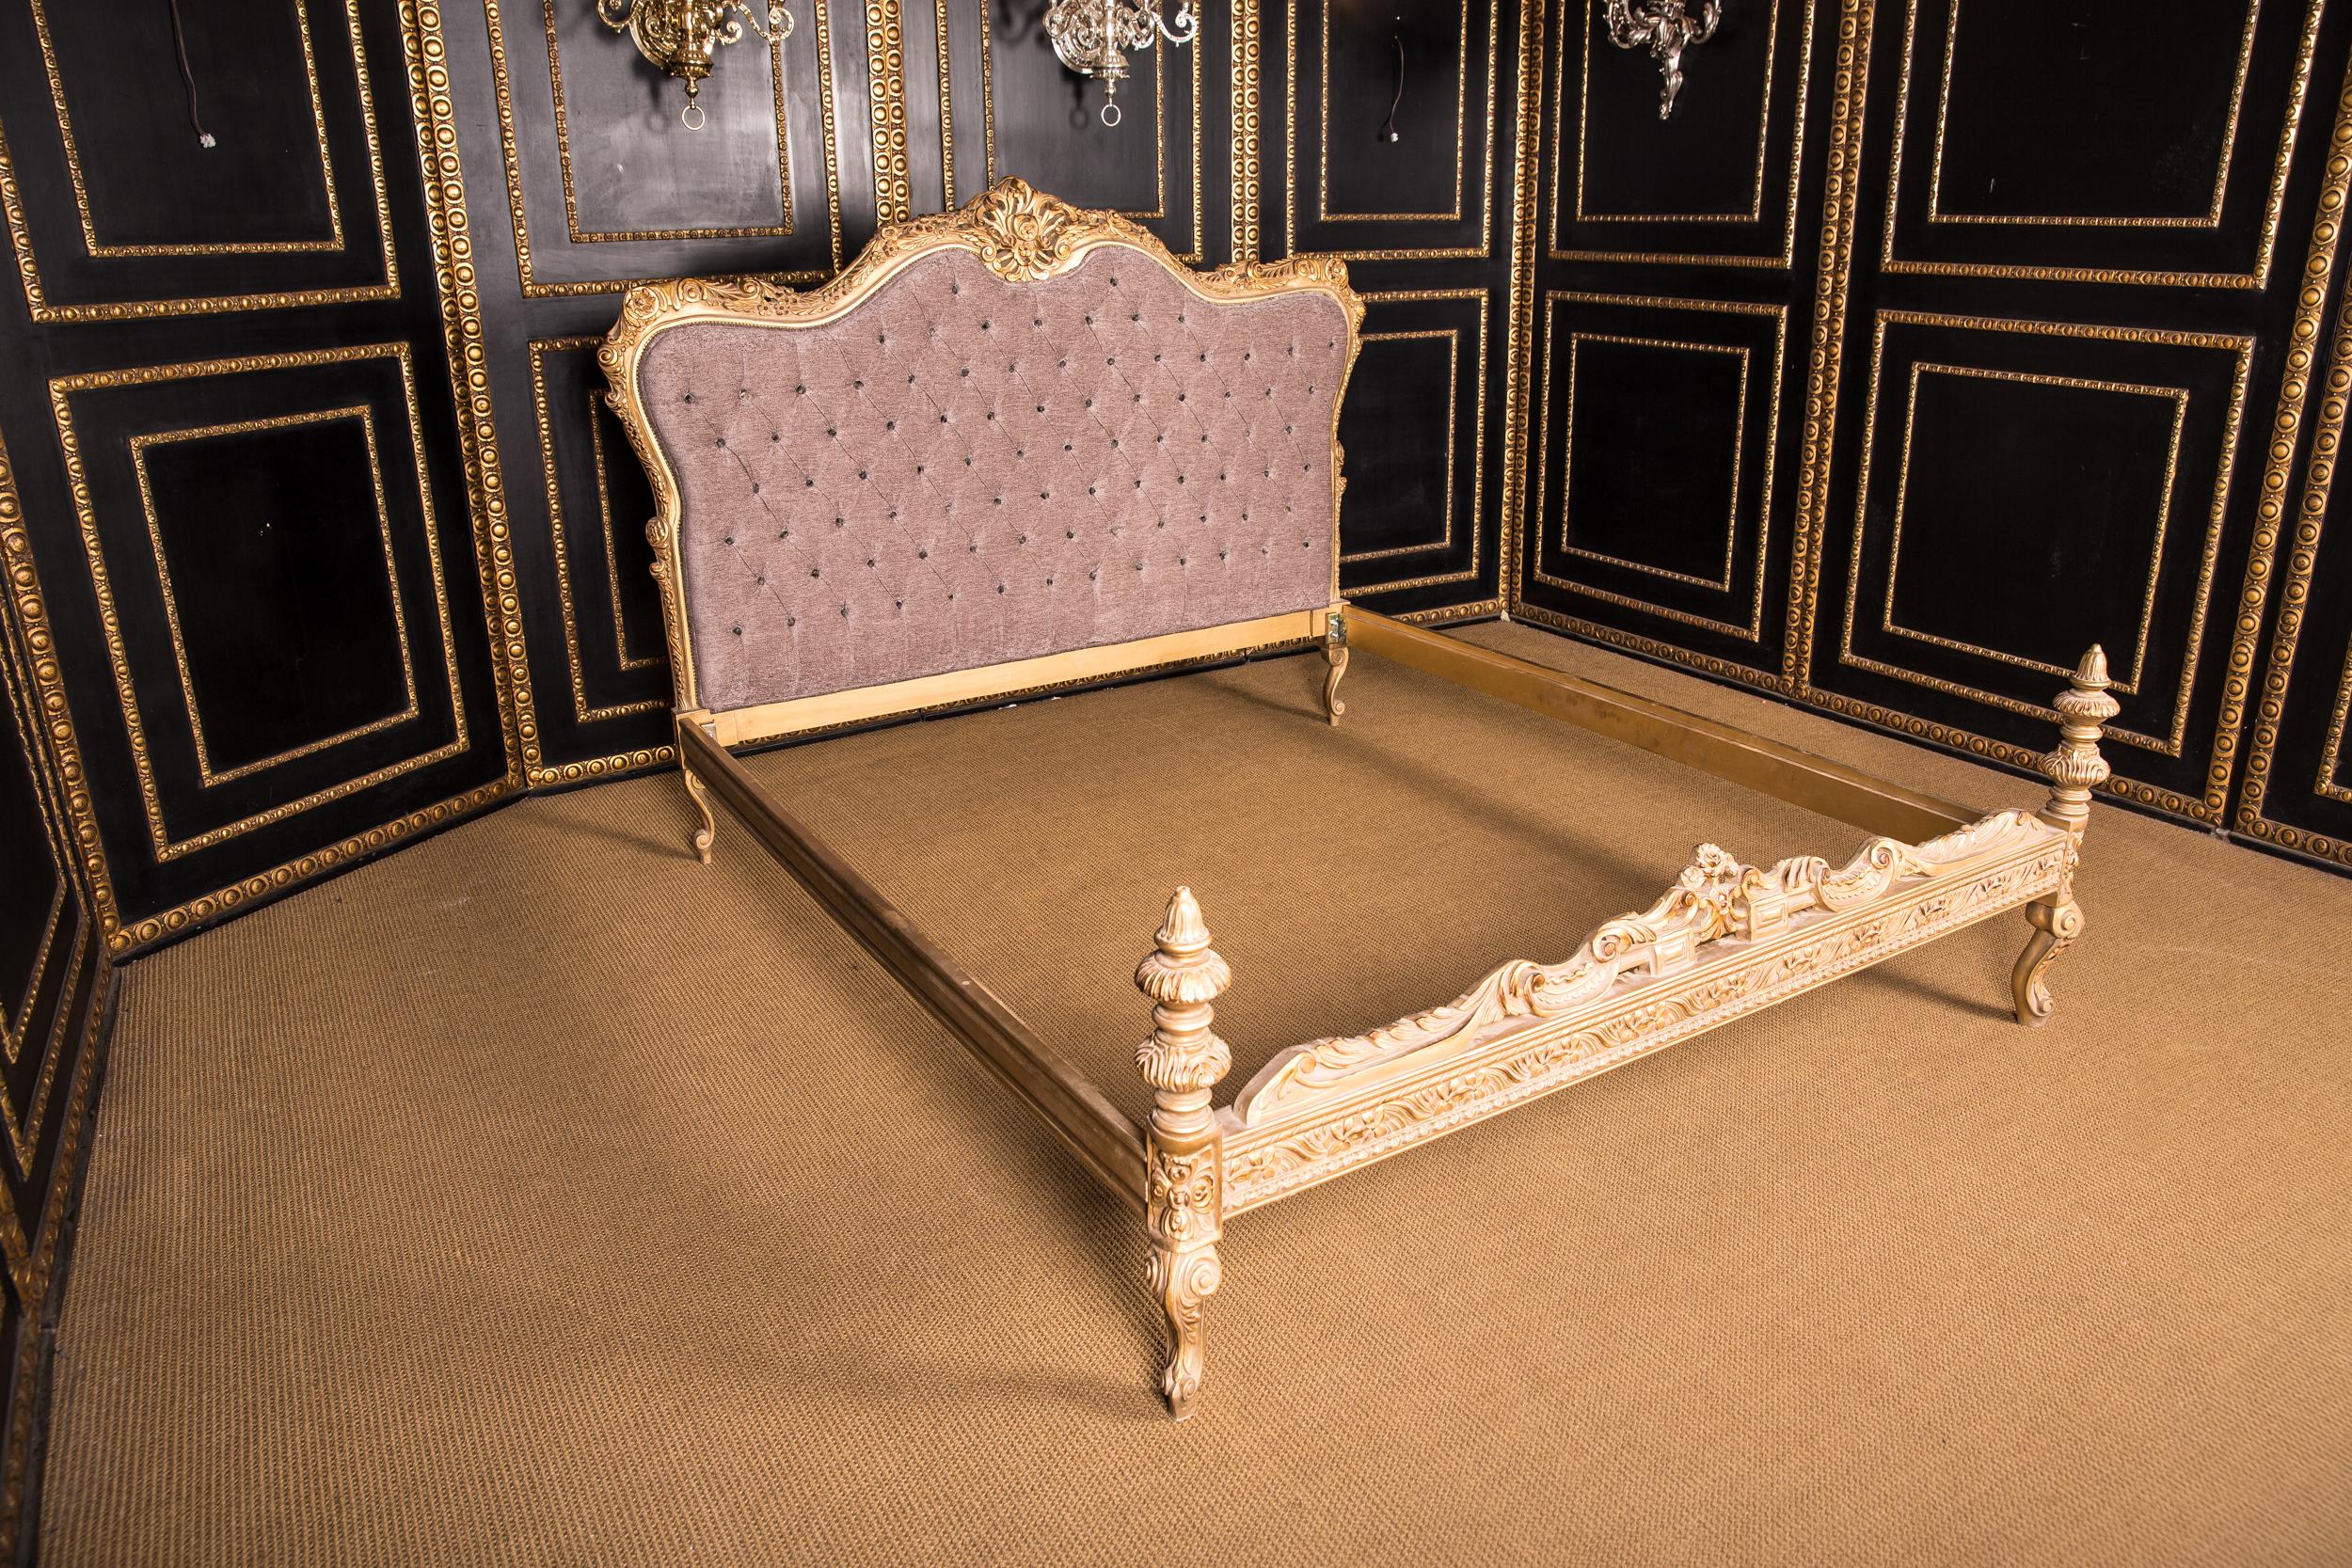 Solid beechwood, finely carved, colored and gilt gilded. Low foot and high headboard quilted, curved backrest frame and open rocaille crowning. Everything is done by hand.